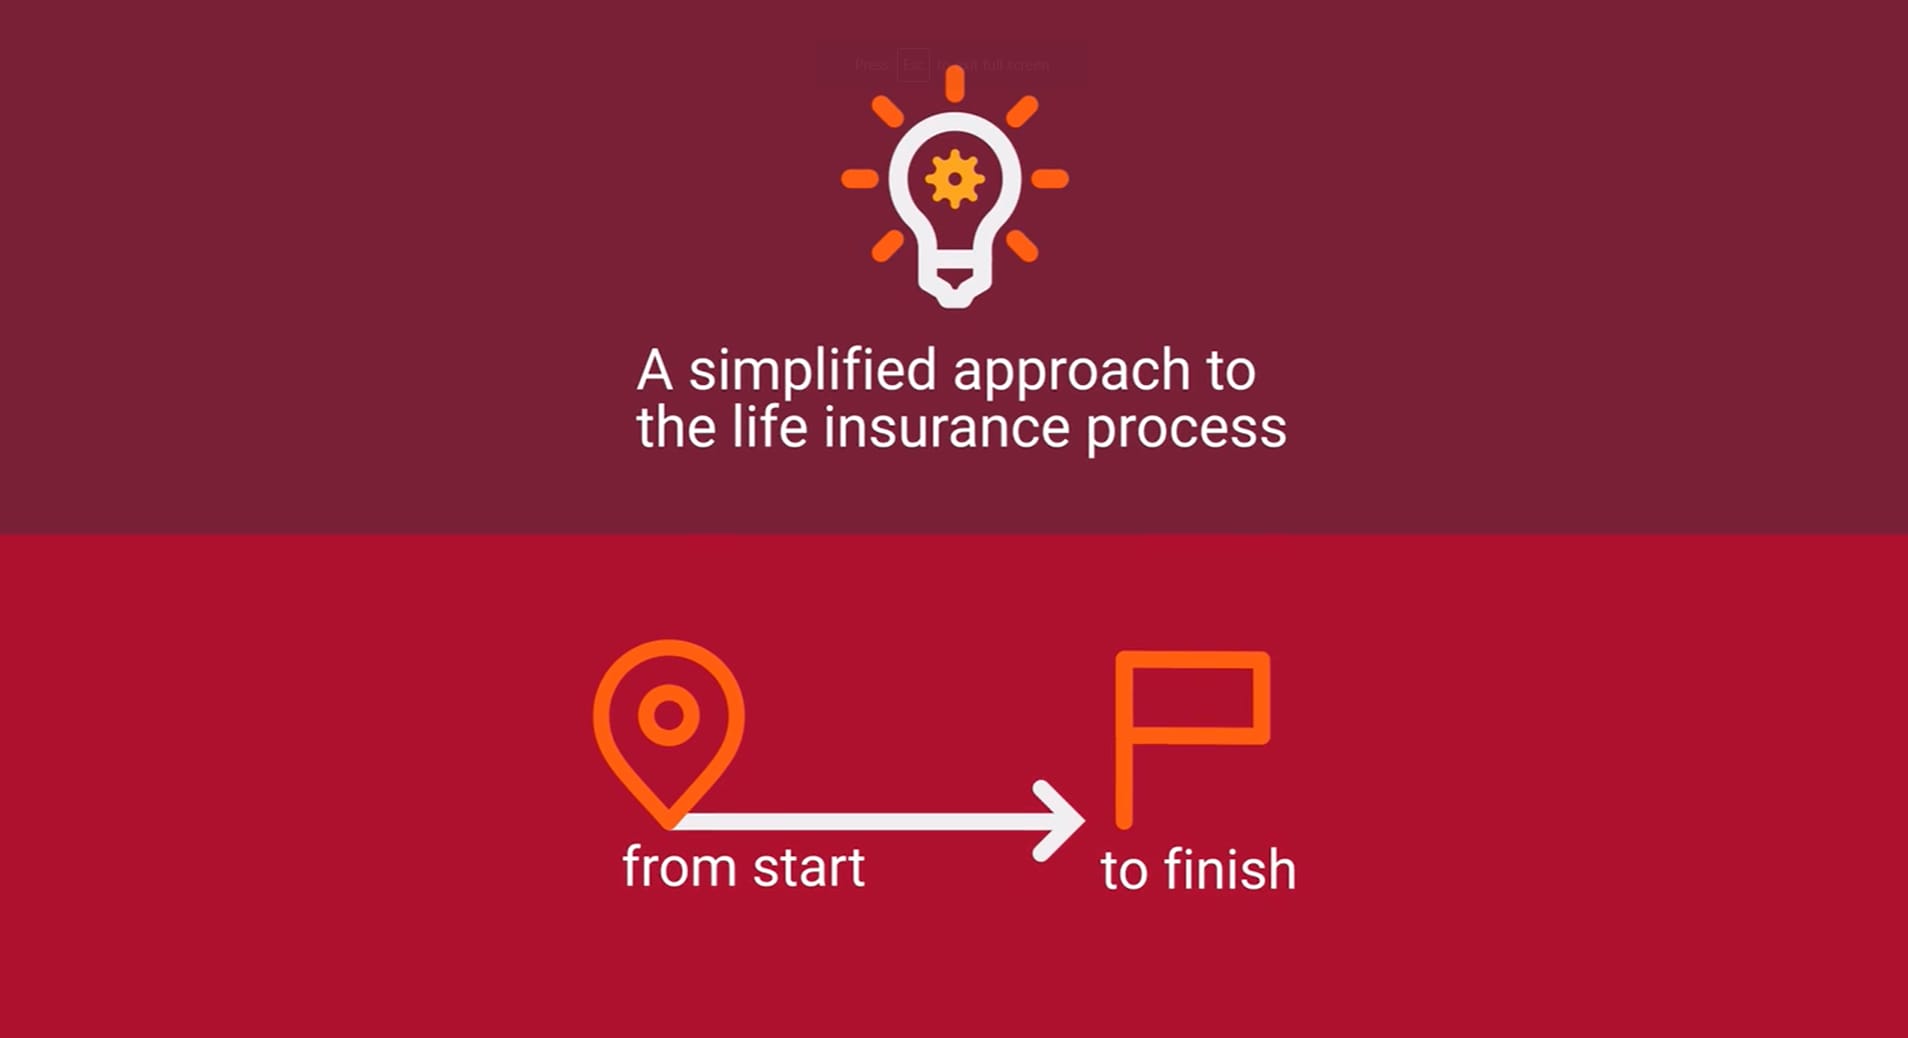 A simplified approach to the life insurance process from start to finish